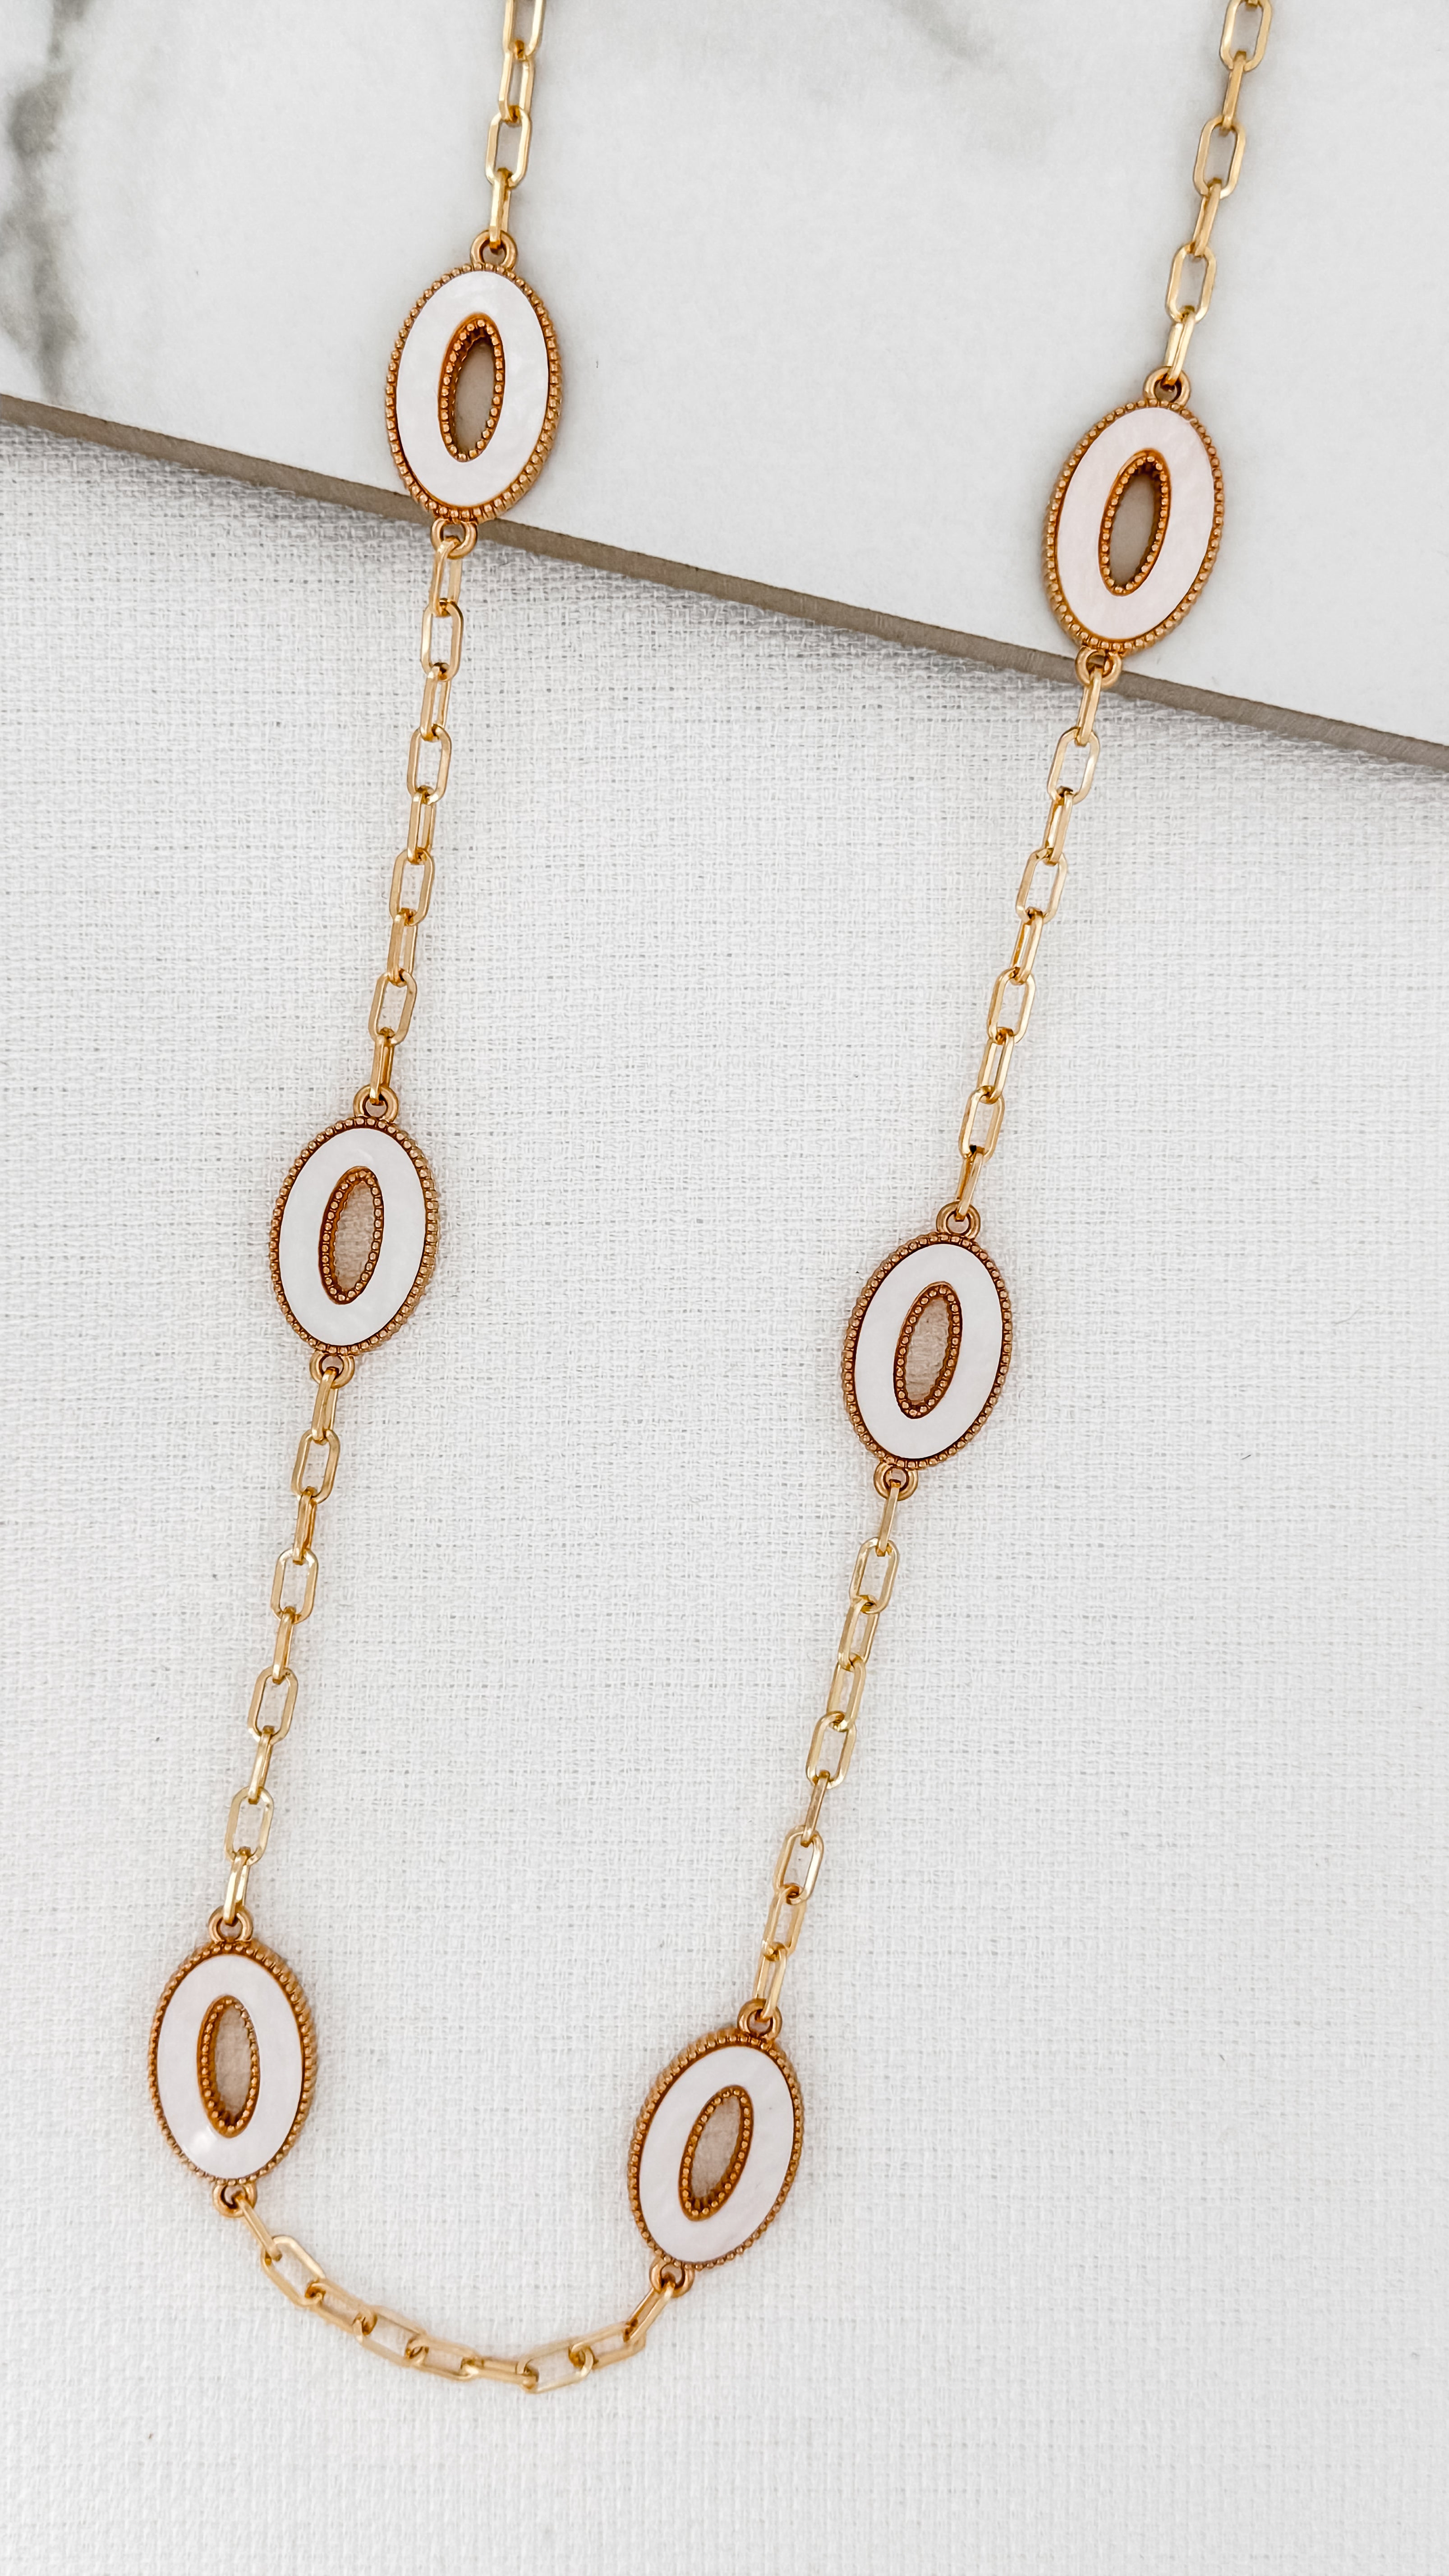 Oval Long Chain Necklace in Gold